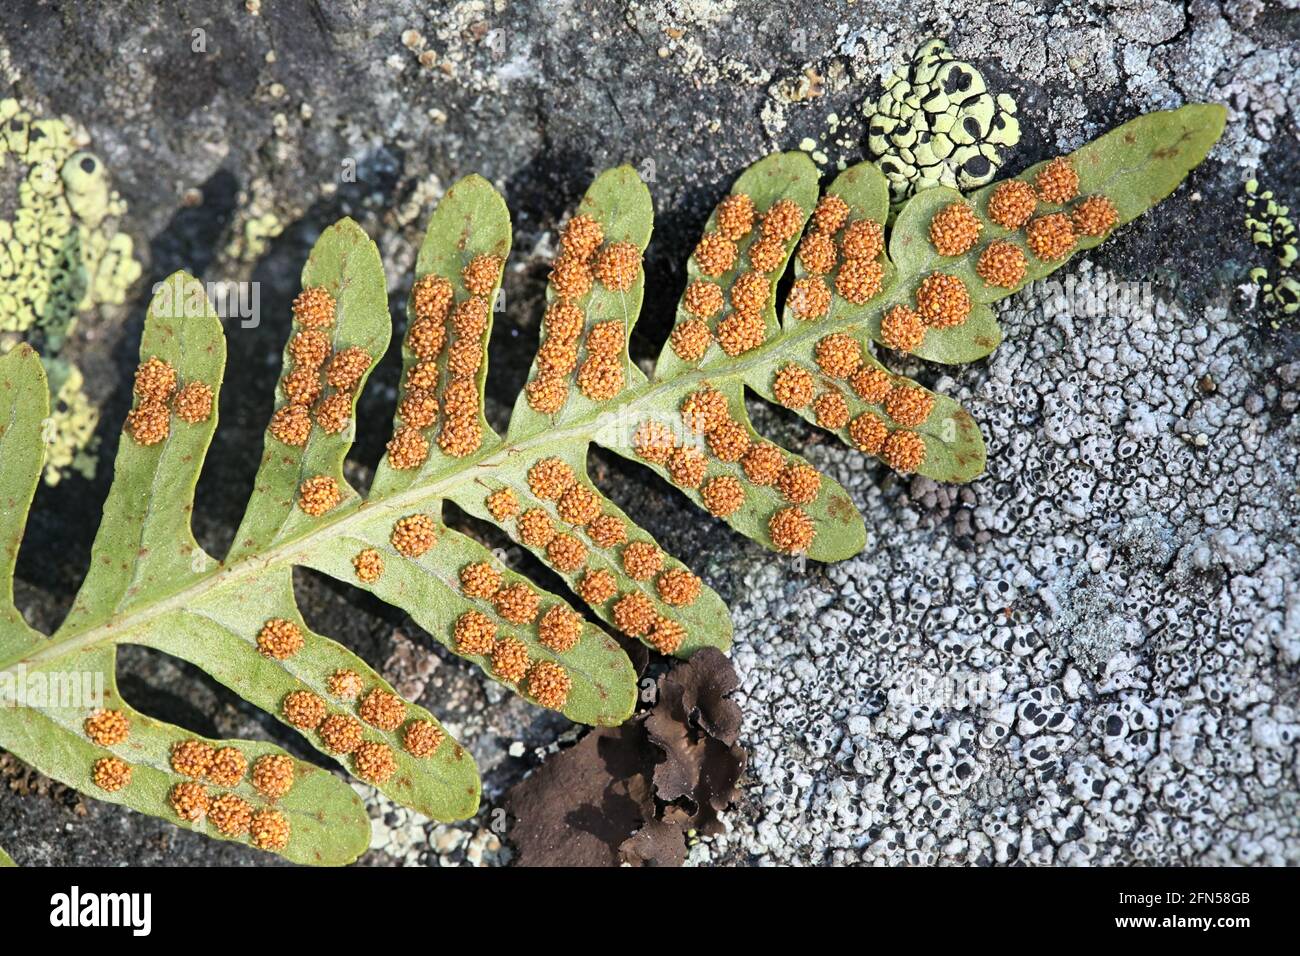 Sorus or a cluster of sporangia of Polypodium vulgare, the common polypody, also called the rockcap fern Stock Photo